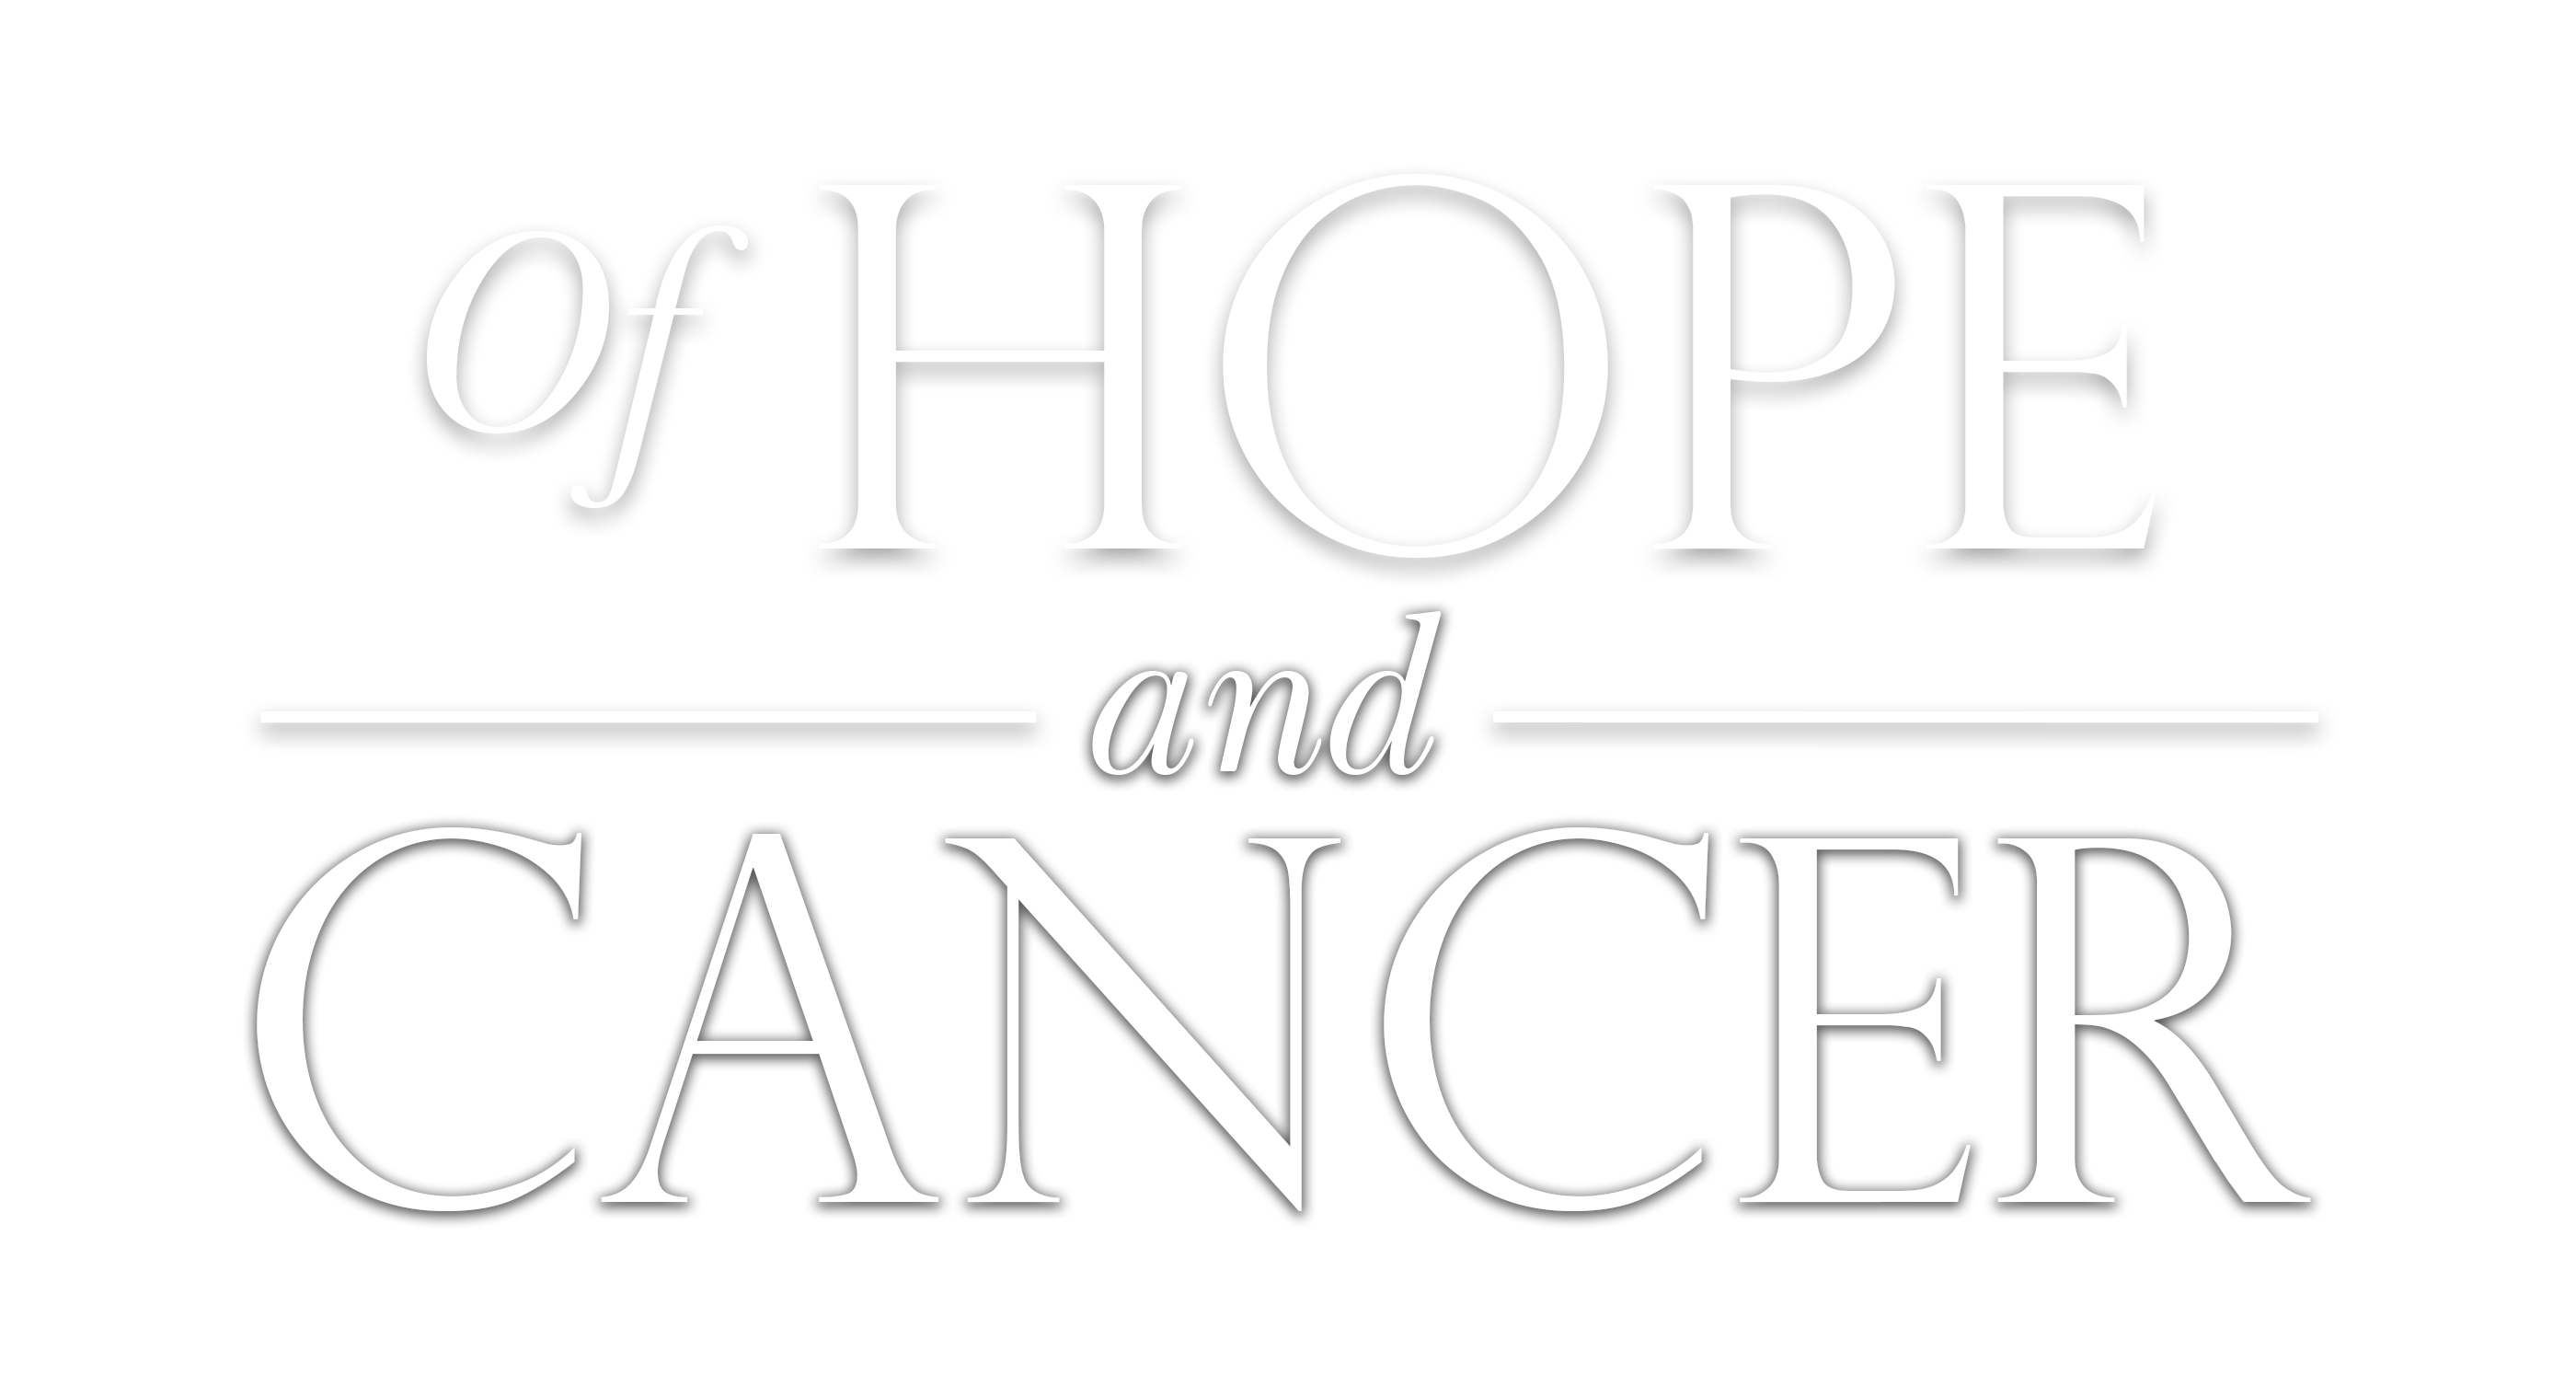 Of Hope and Cancer